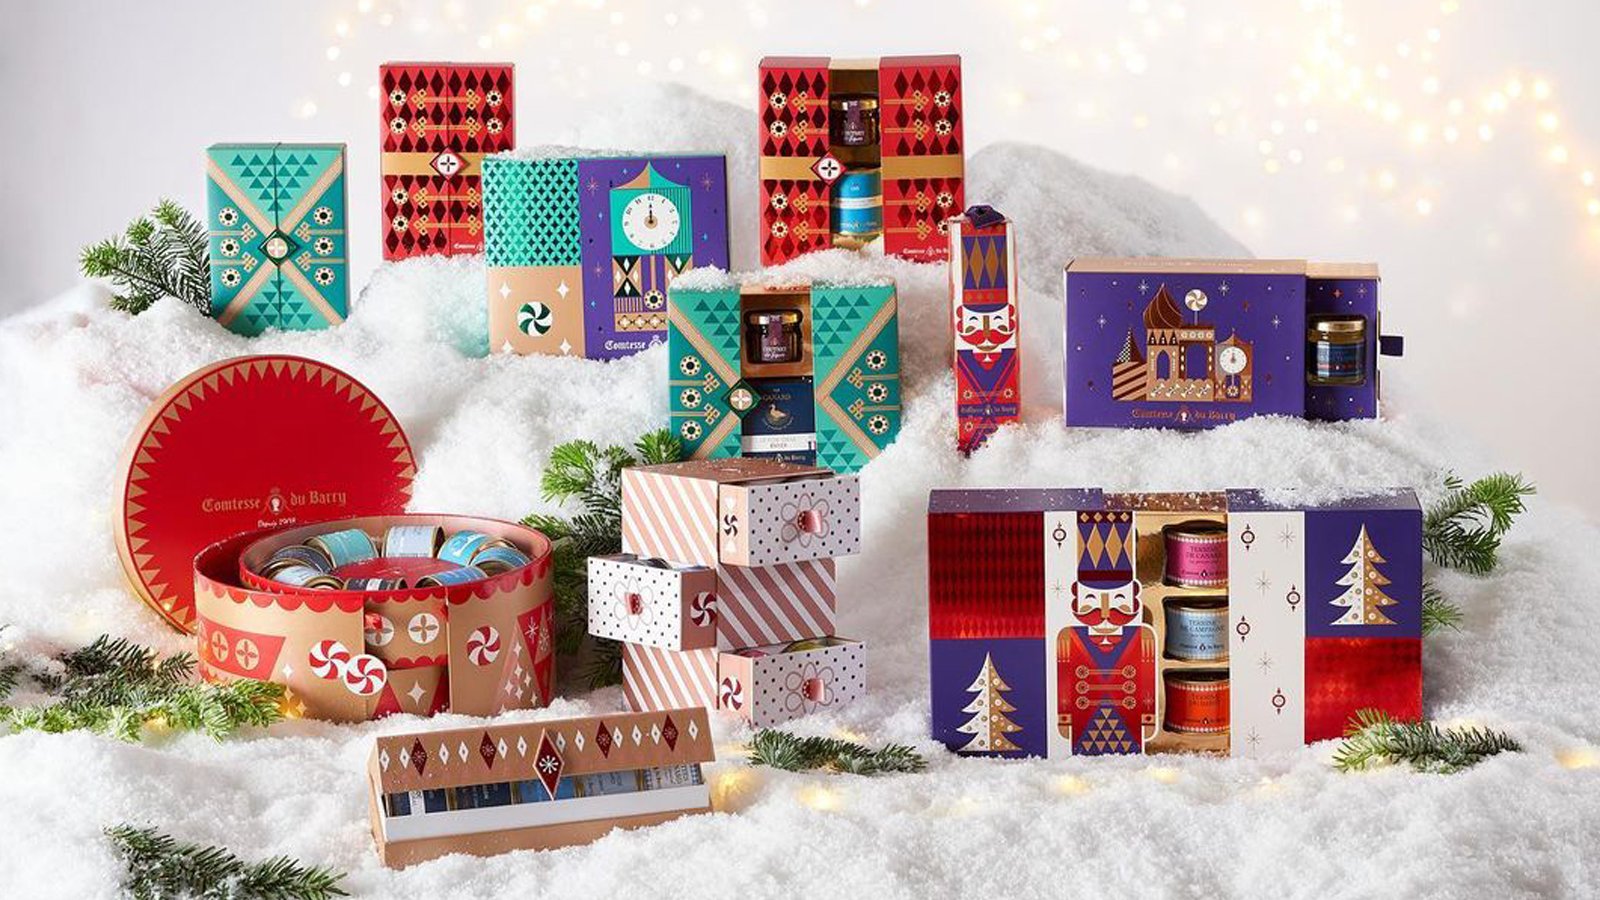 Comtesse du Barry's sweet and savory advent calendars 2021